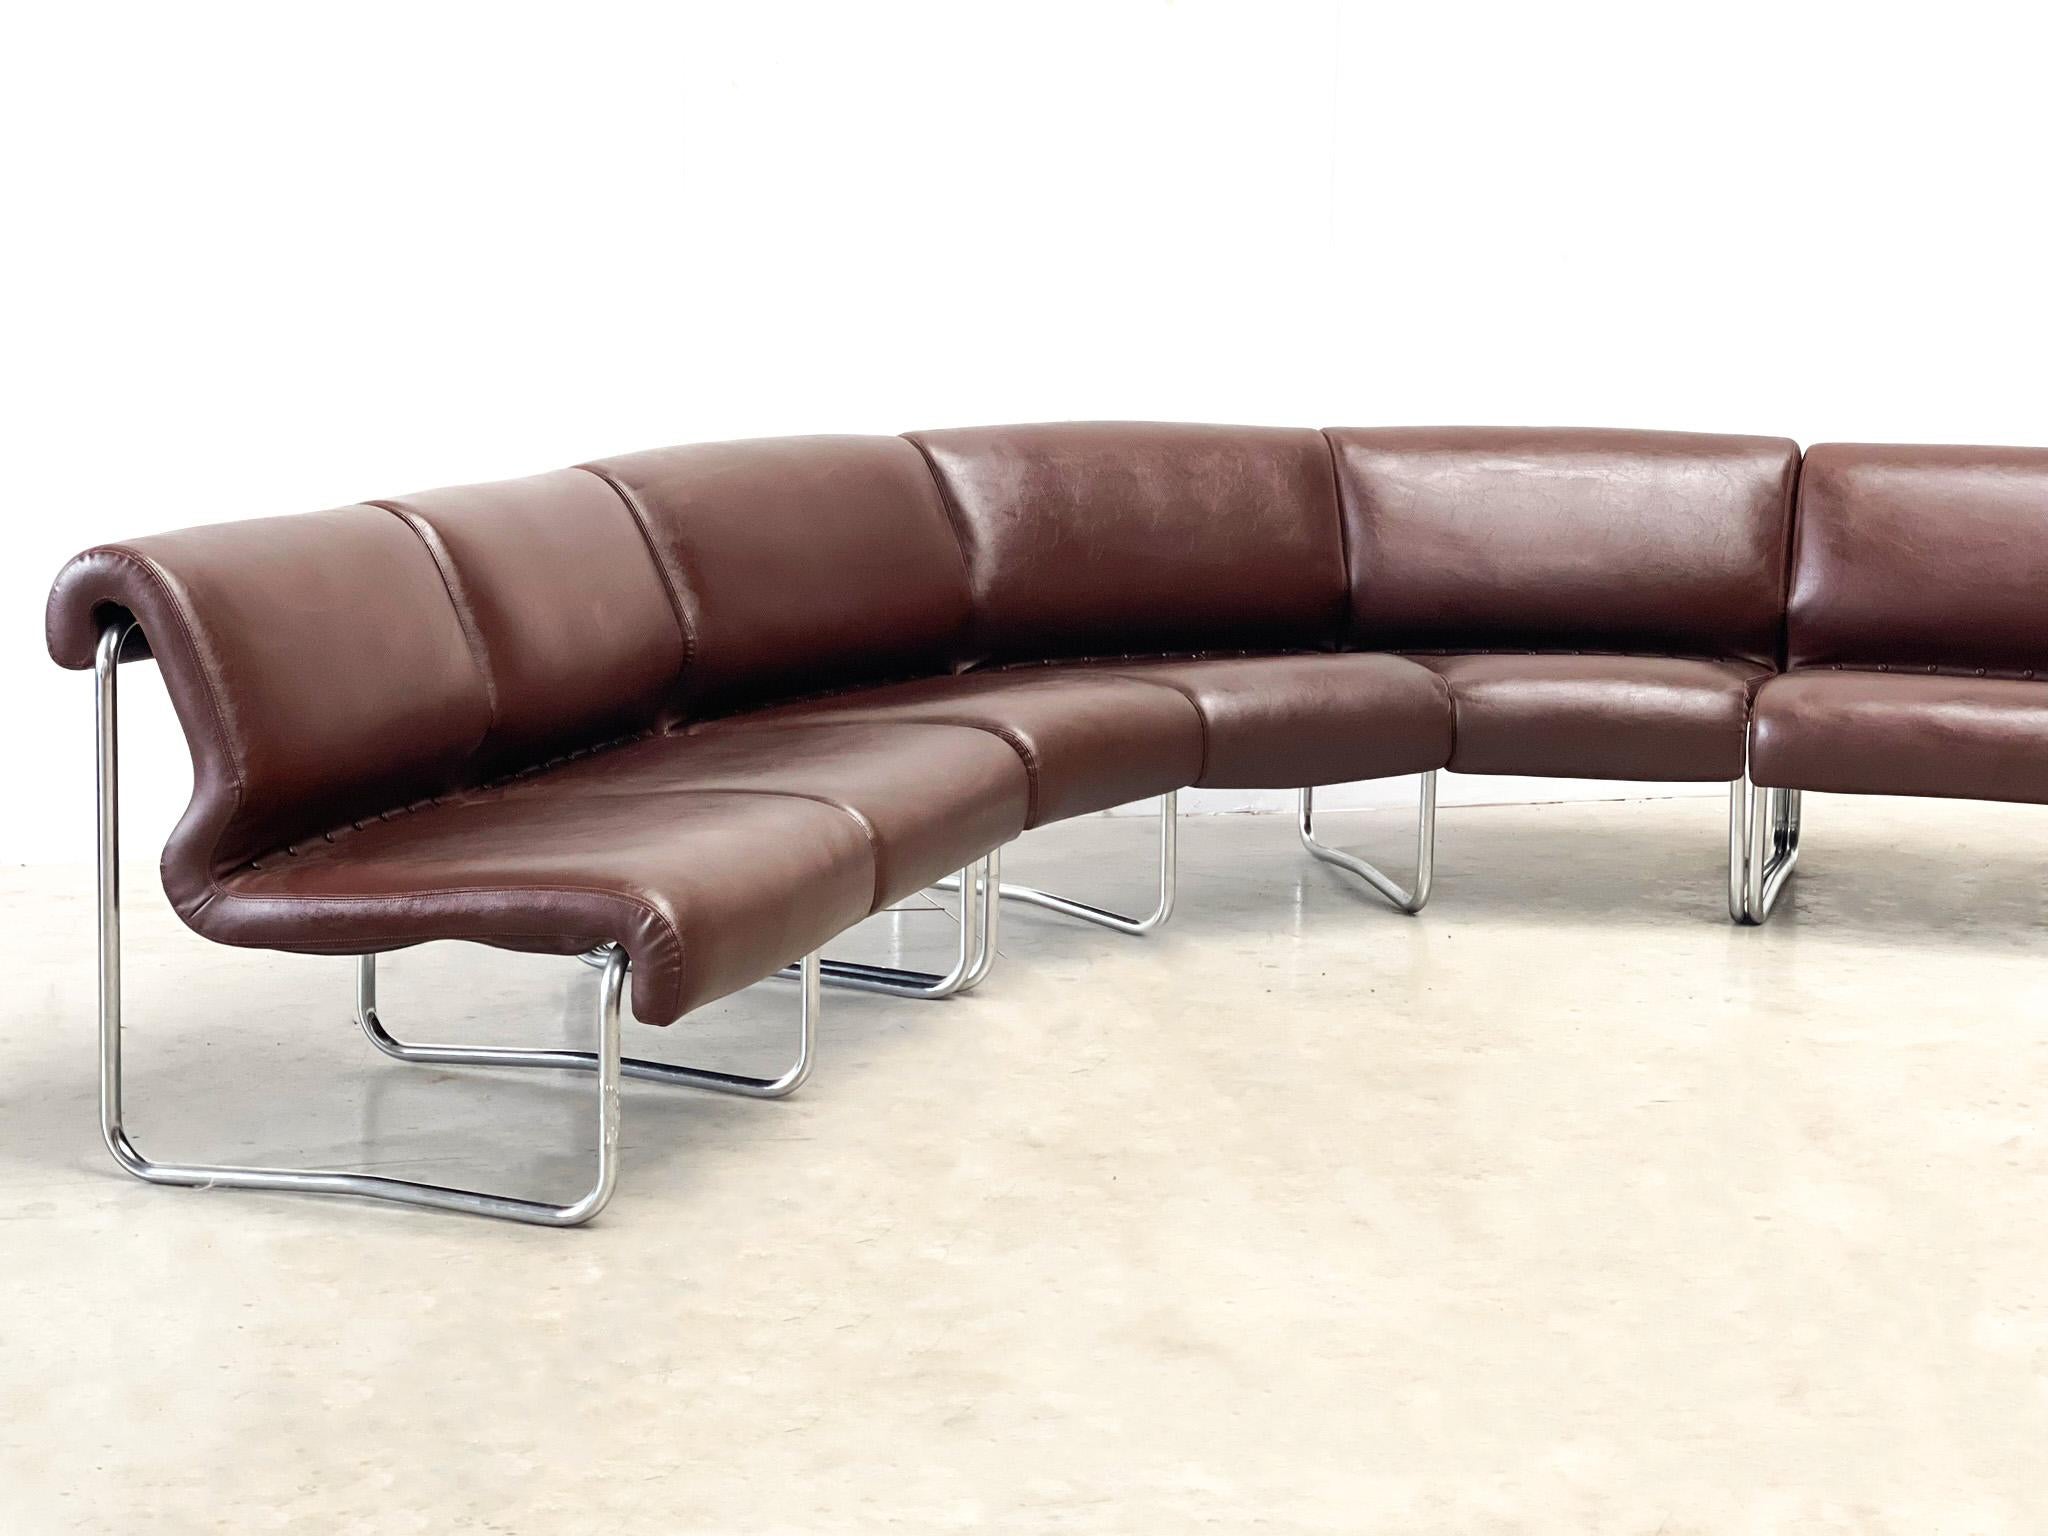 An 1970's modular oak sofa set with an amazing brown leather and  metal frame
The sofa can be configured as shown or in sections around the room. It features a 3 seater, 2 seater and a corner
It is upholstered in a beautiful brown leather with a